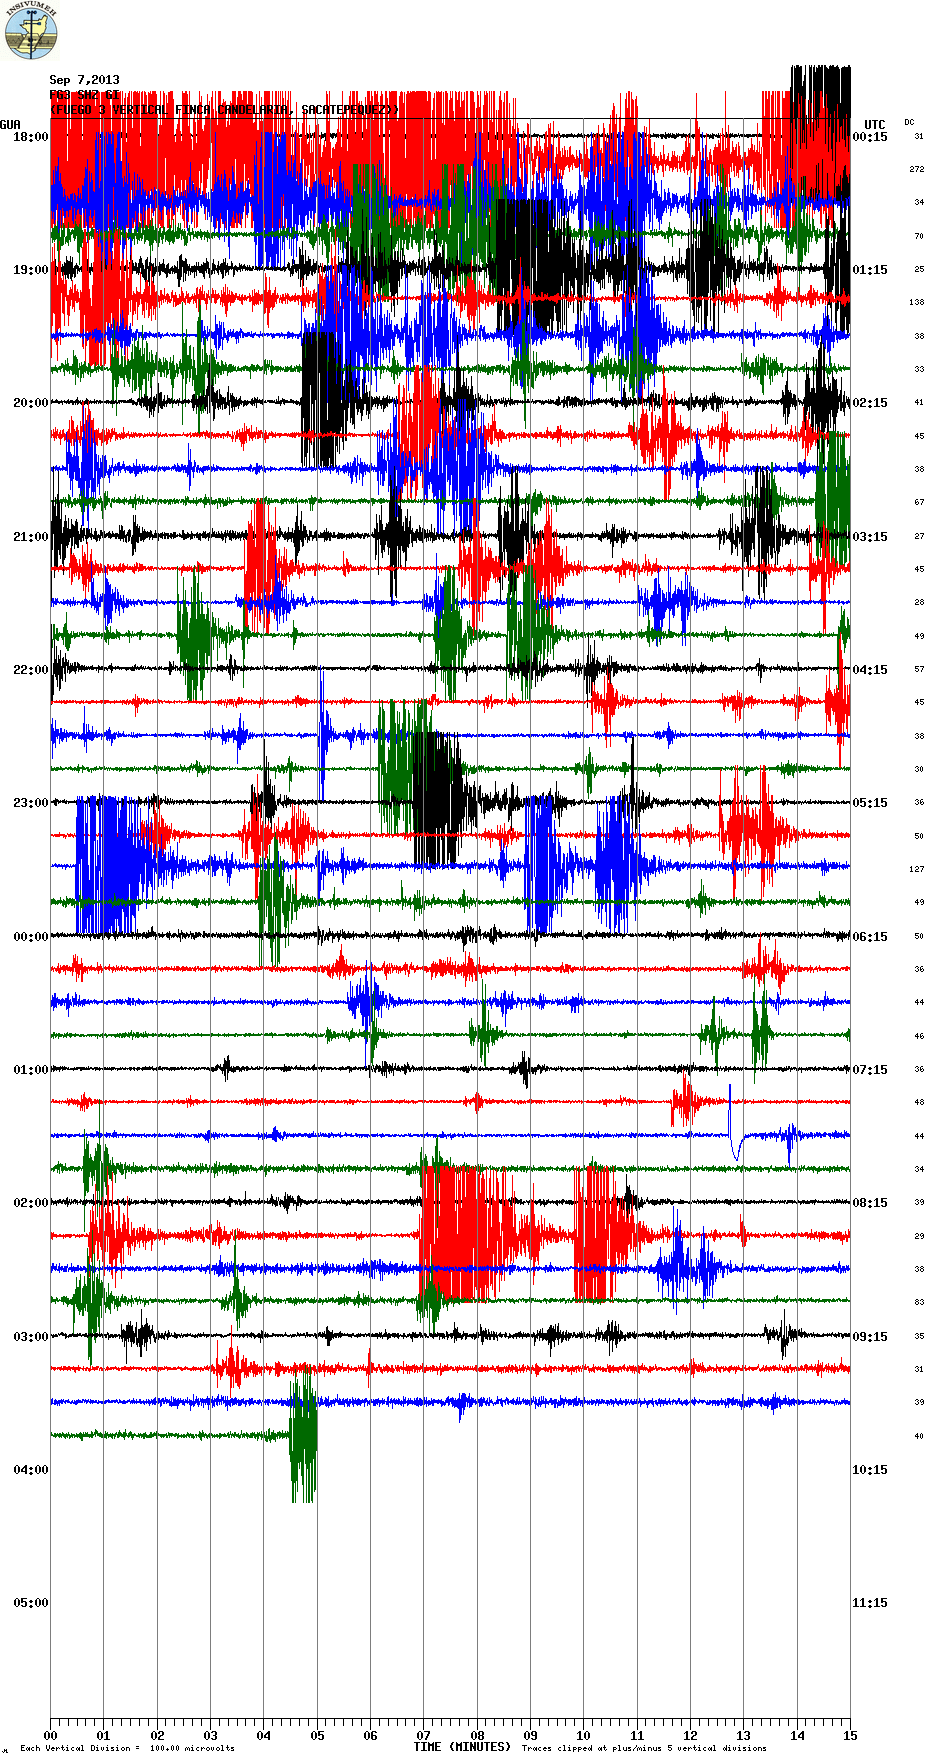 Current seismic signal from Fuego volcano (FG3 station, INSIVUMEH)